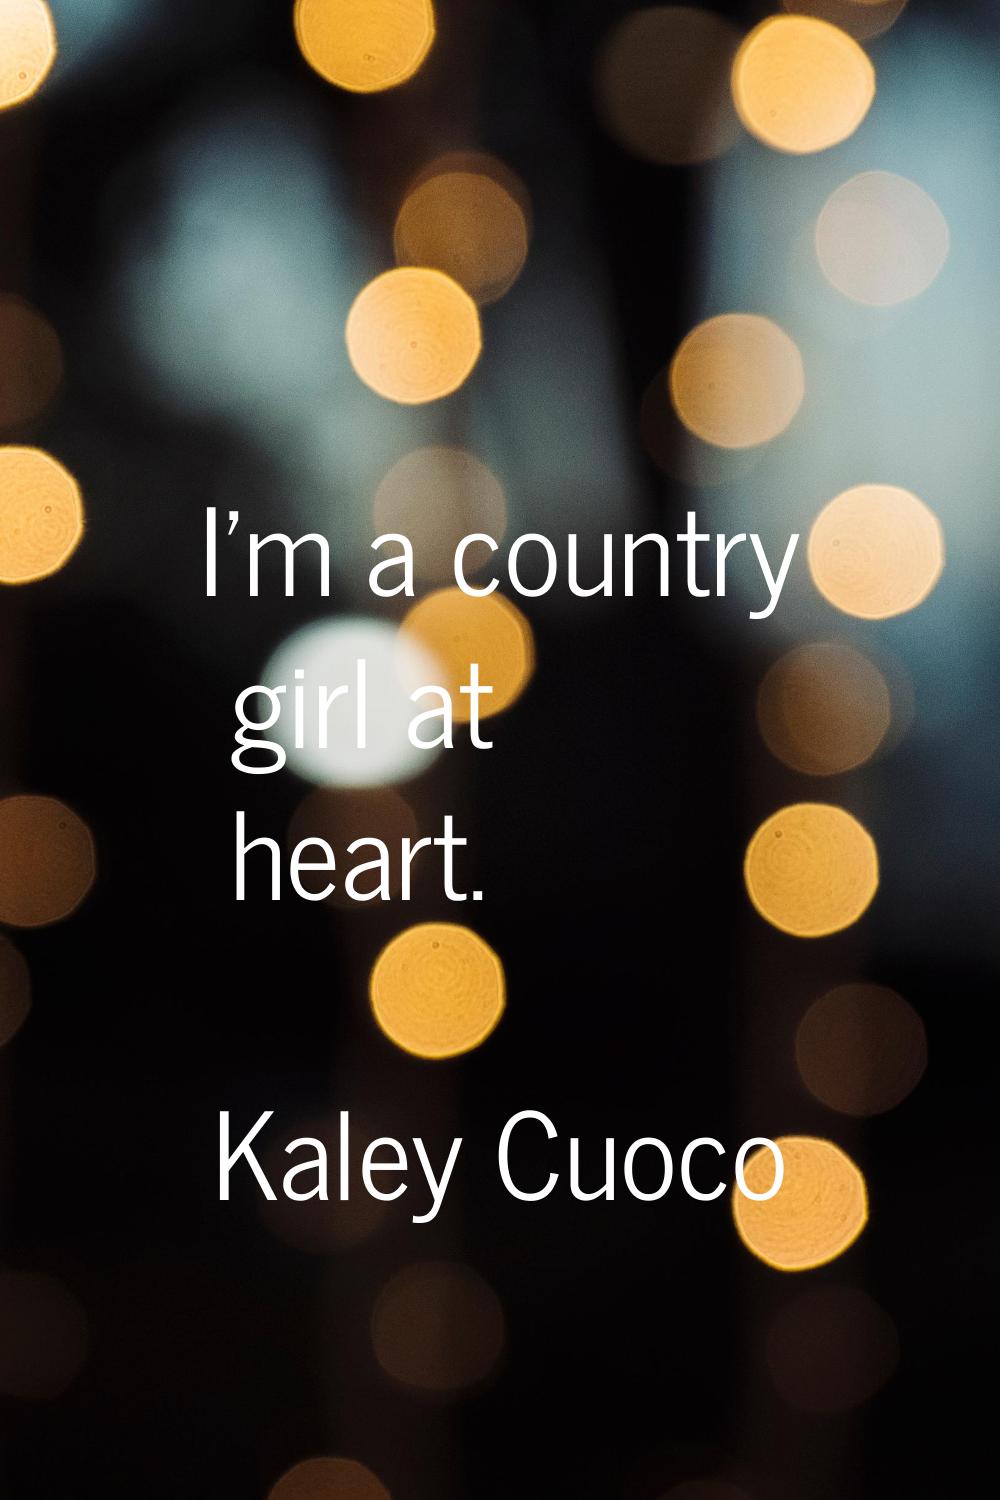 I'm a country girl at heart.